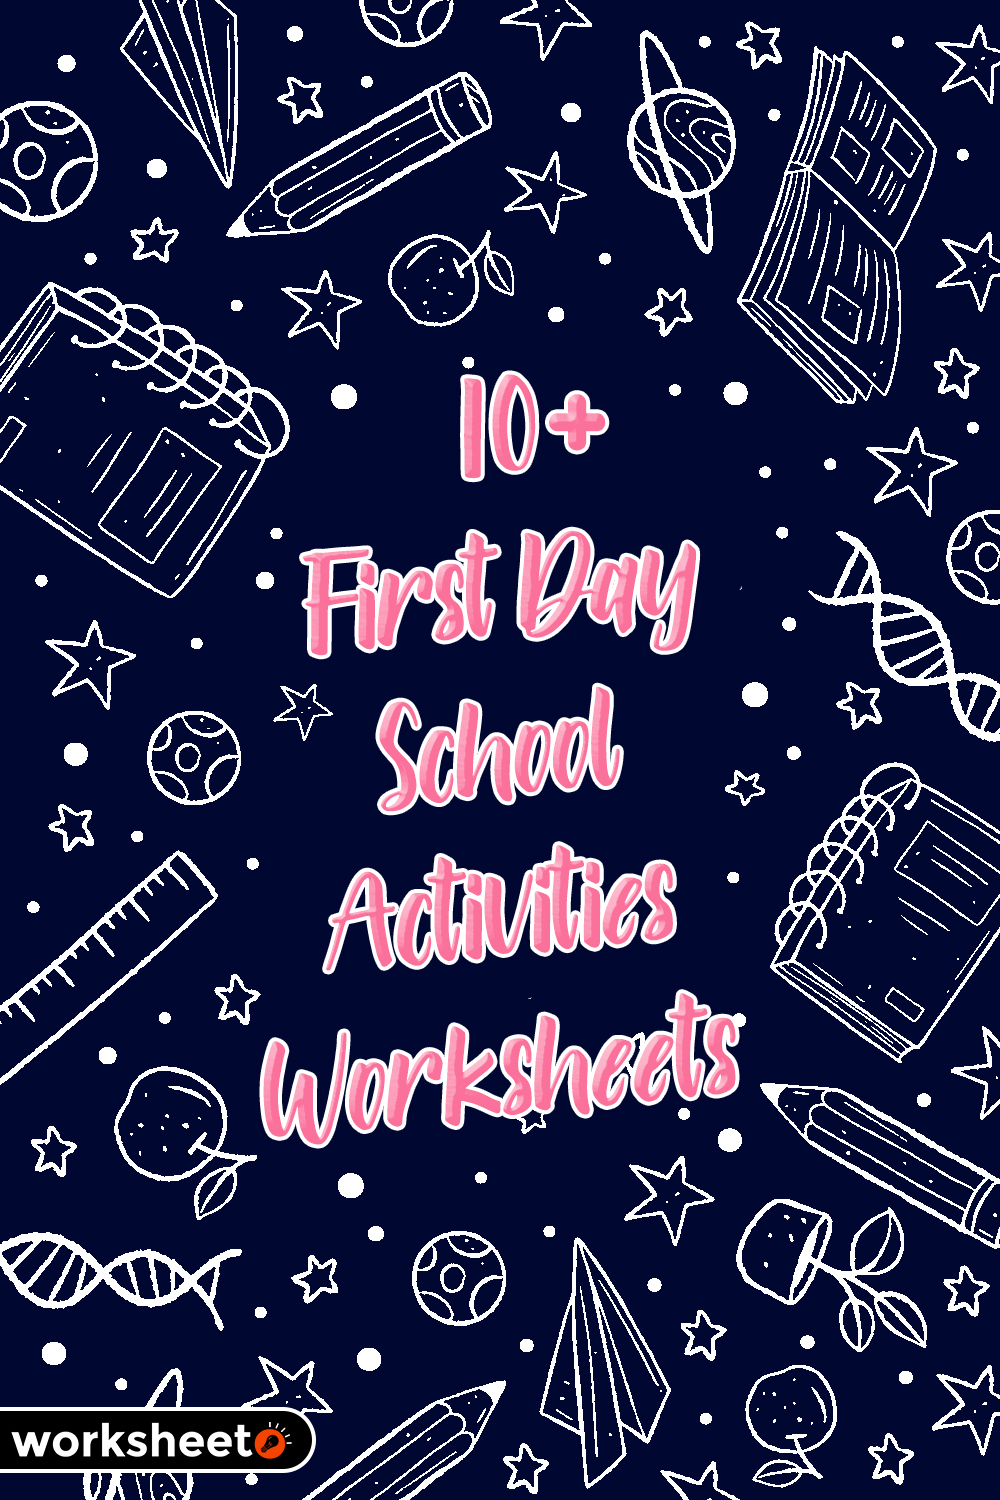 17 Images of First Day School Activities Worksheets